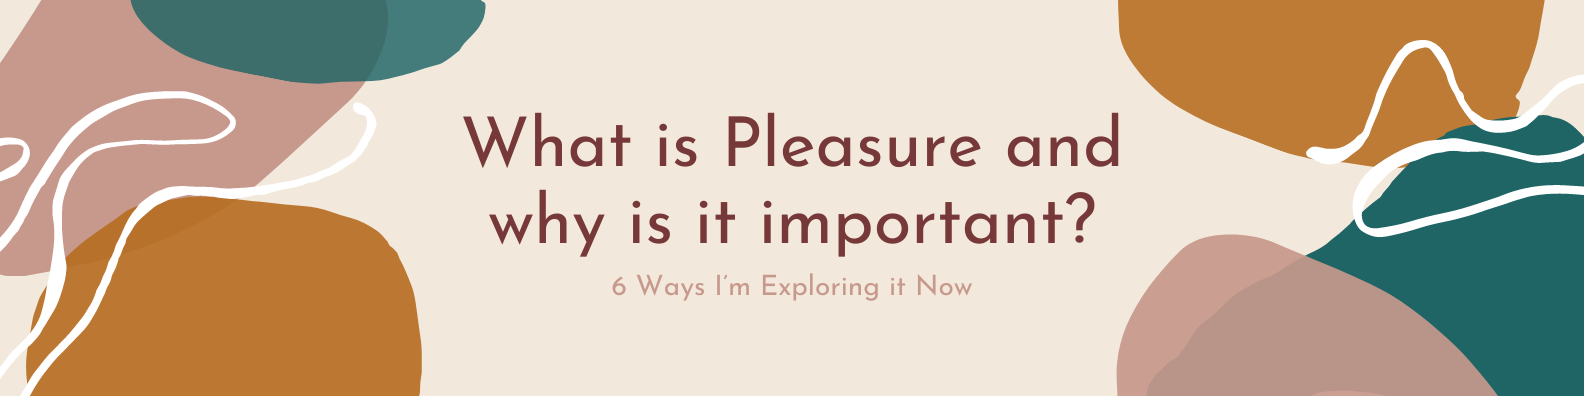 What is Pleasure and why is it important? 6 Ways I’m Exploring it Now